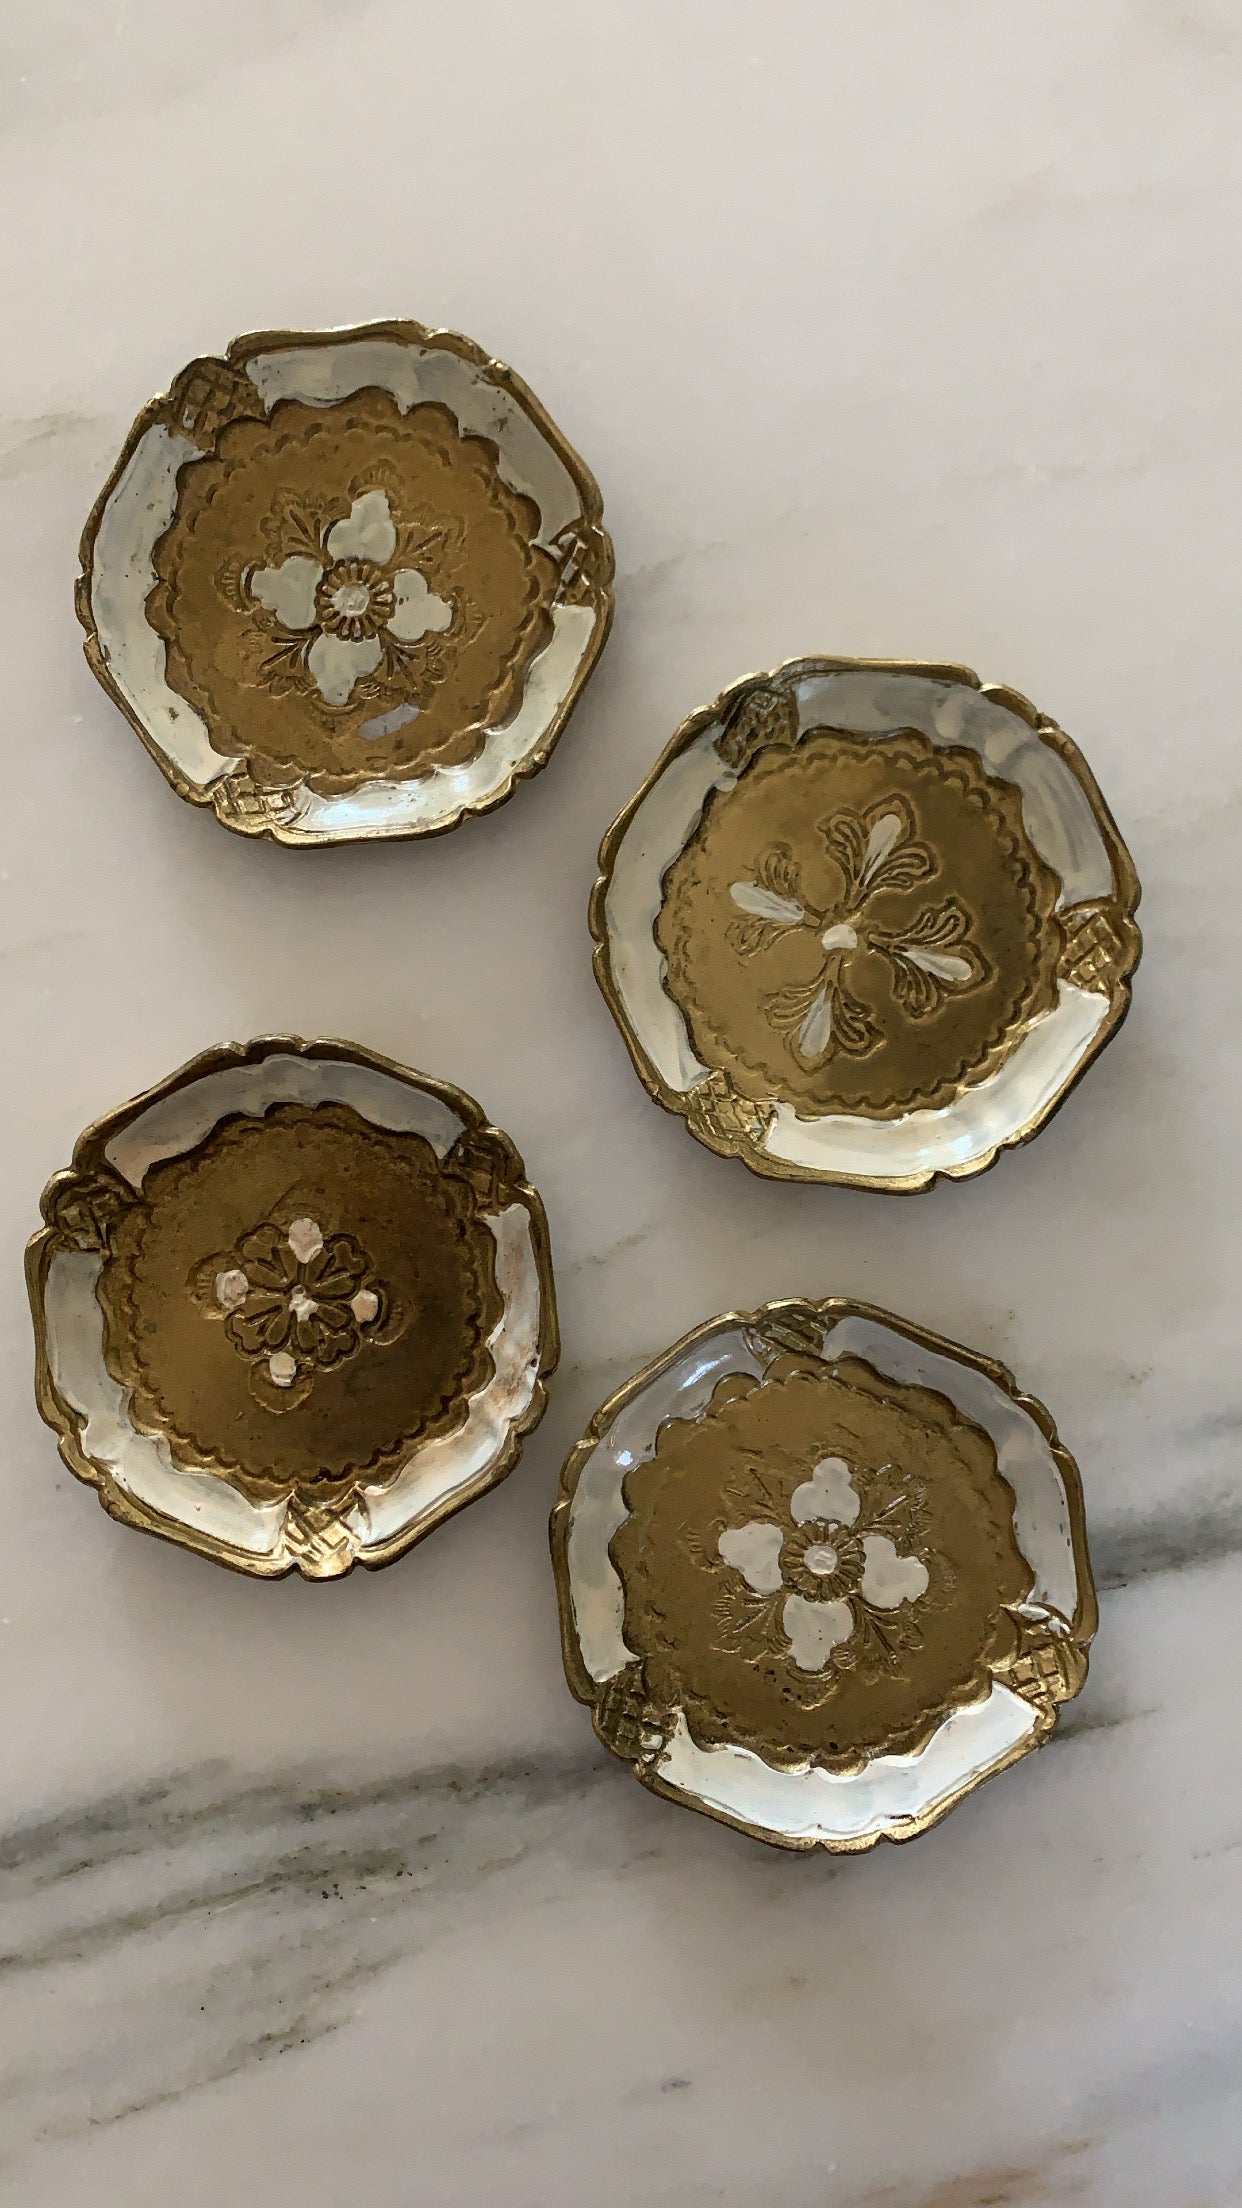 Vintage Florentine Catch All or Coasters in Cream and Gold (set of 4)